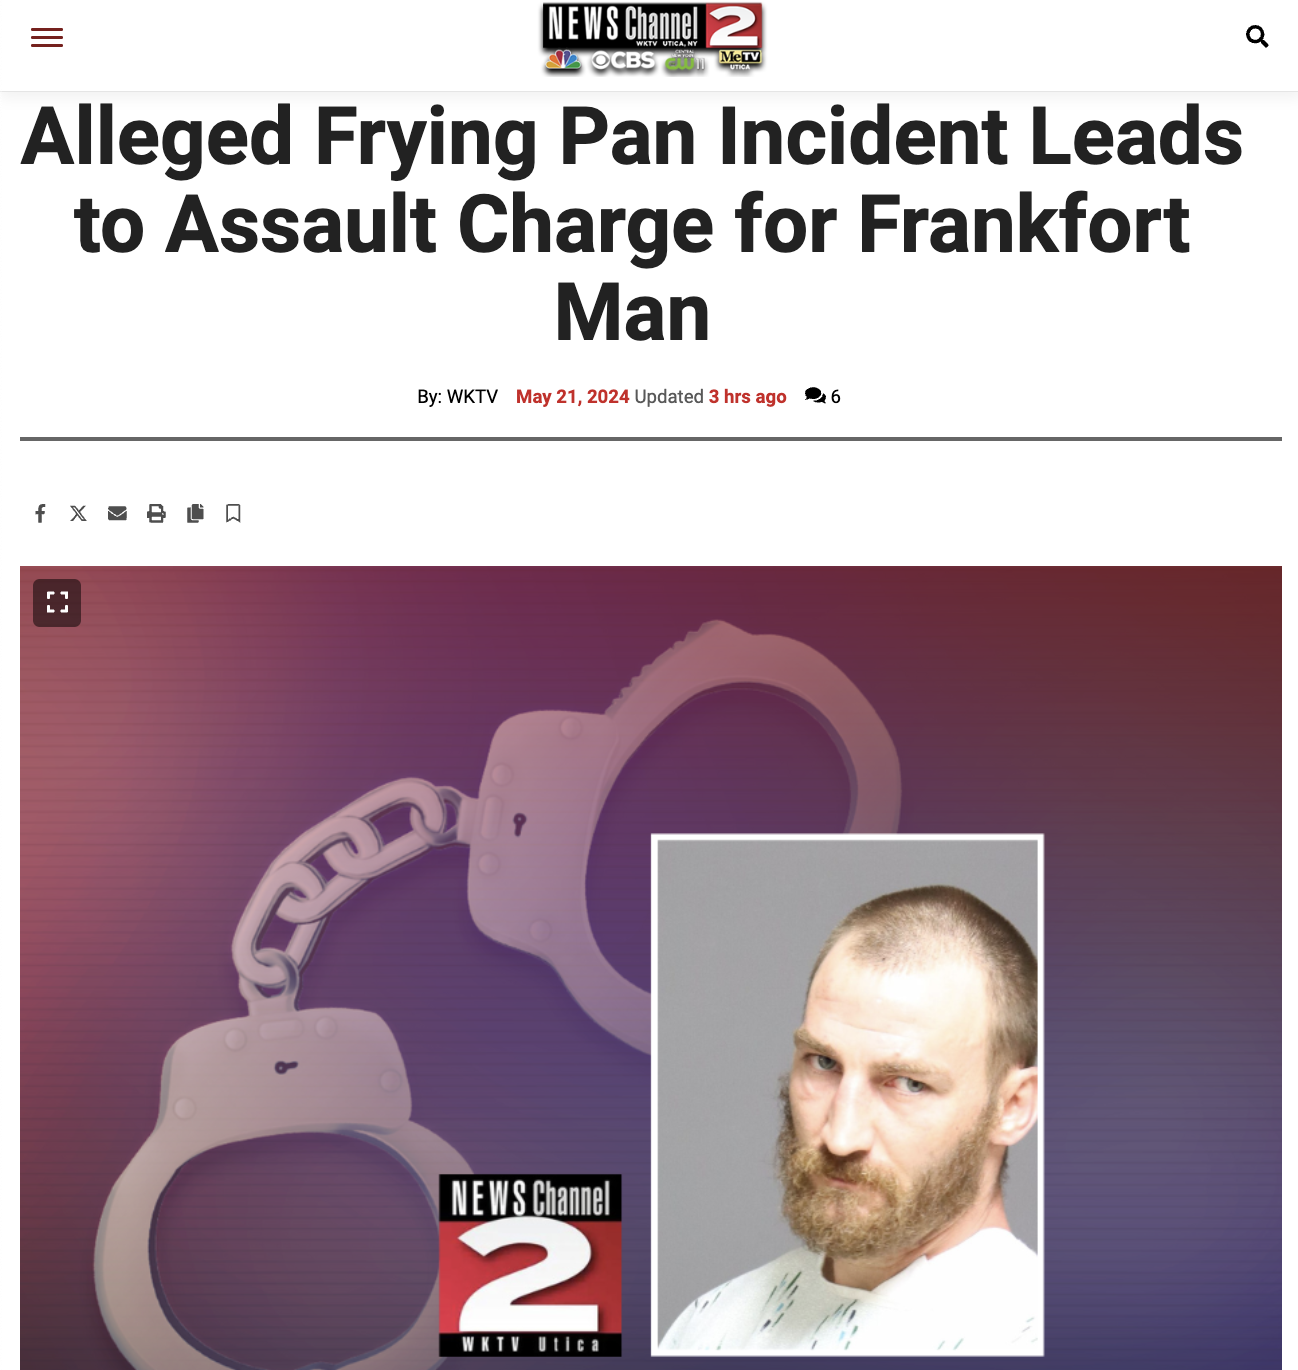 Crime - News Channel Alleged Frying Pan Incident Leads to Assault Charge for Frankfort Man By Wktv Updated 3 hrs ago 6 A News Channel 2